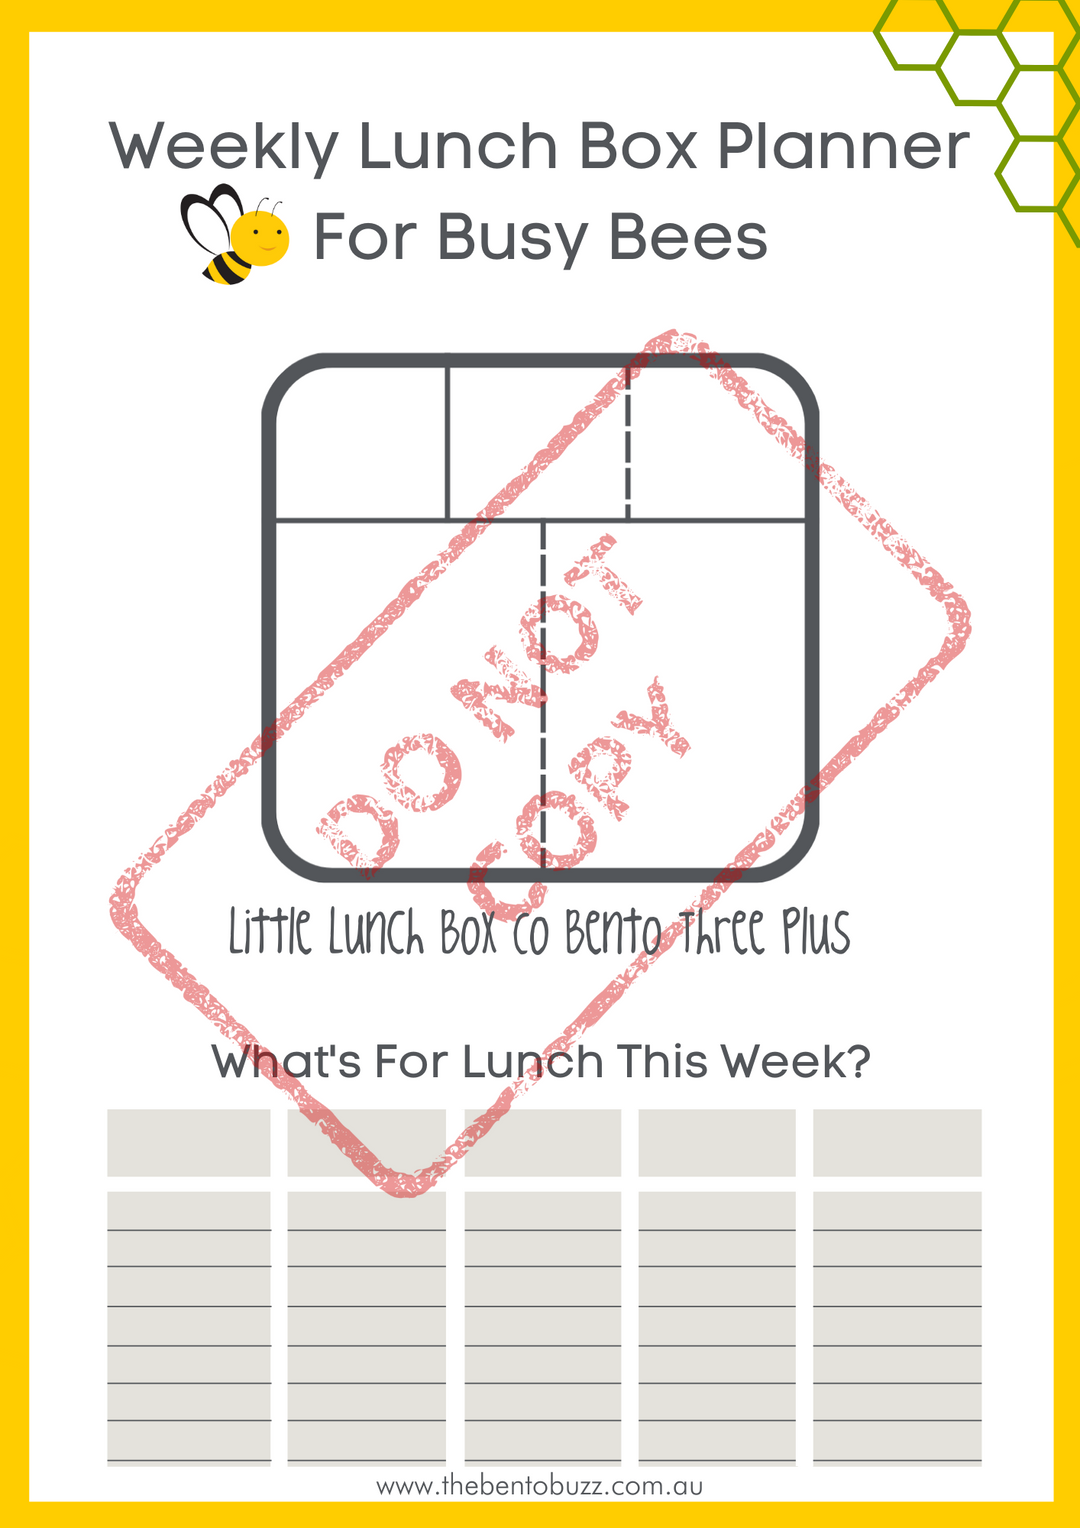 Download & Print Lunch Box Planner - Little Lunch Box Co Bento Three Plus